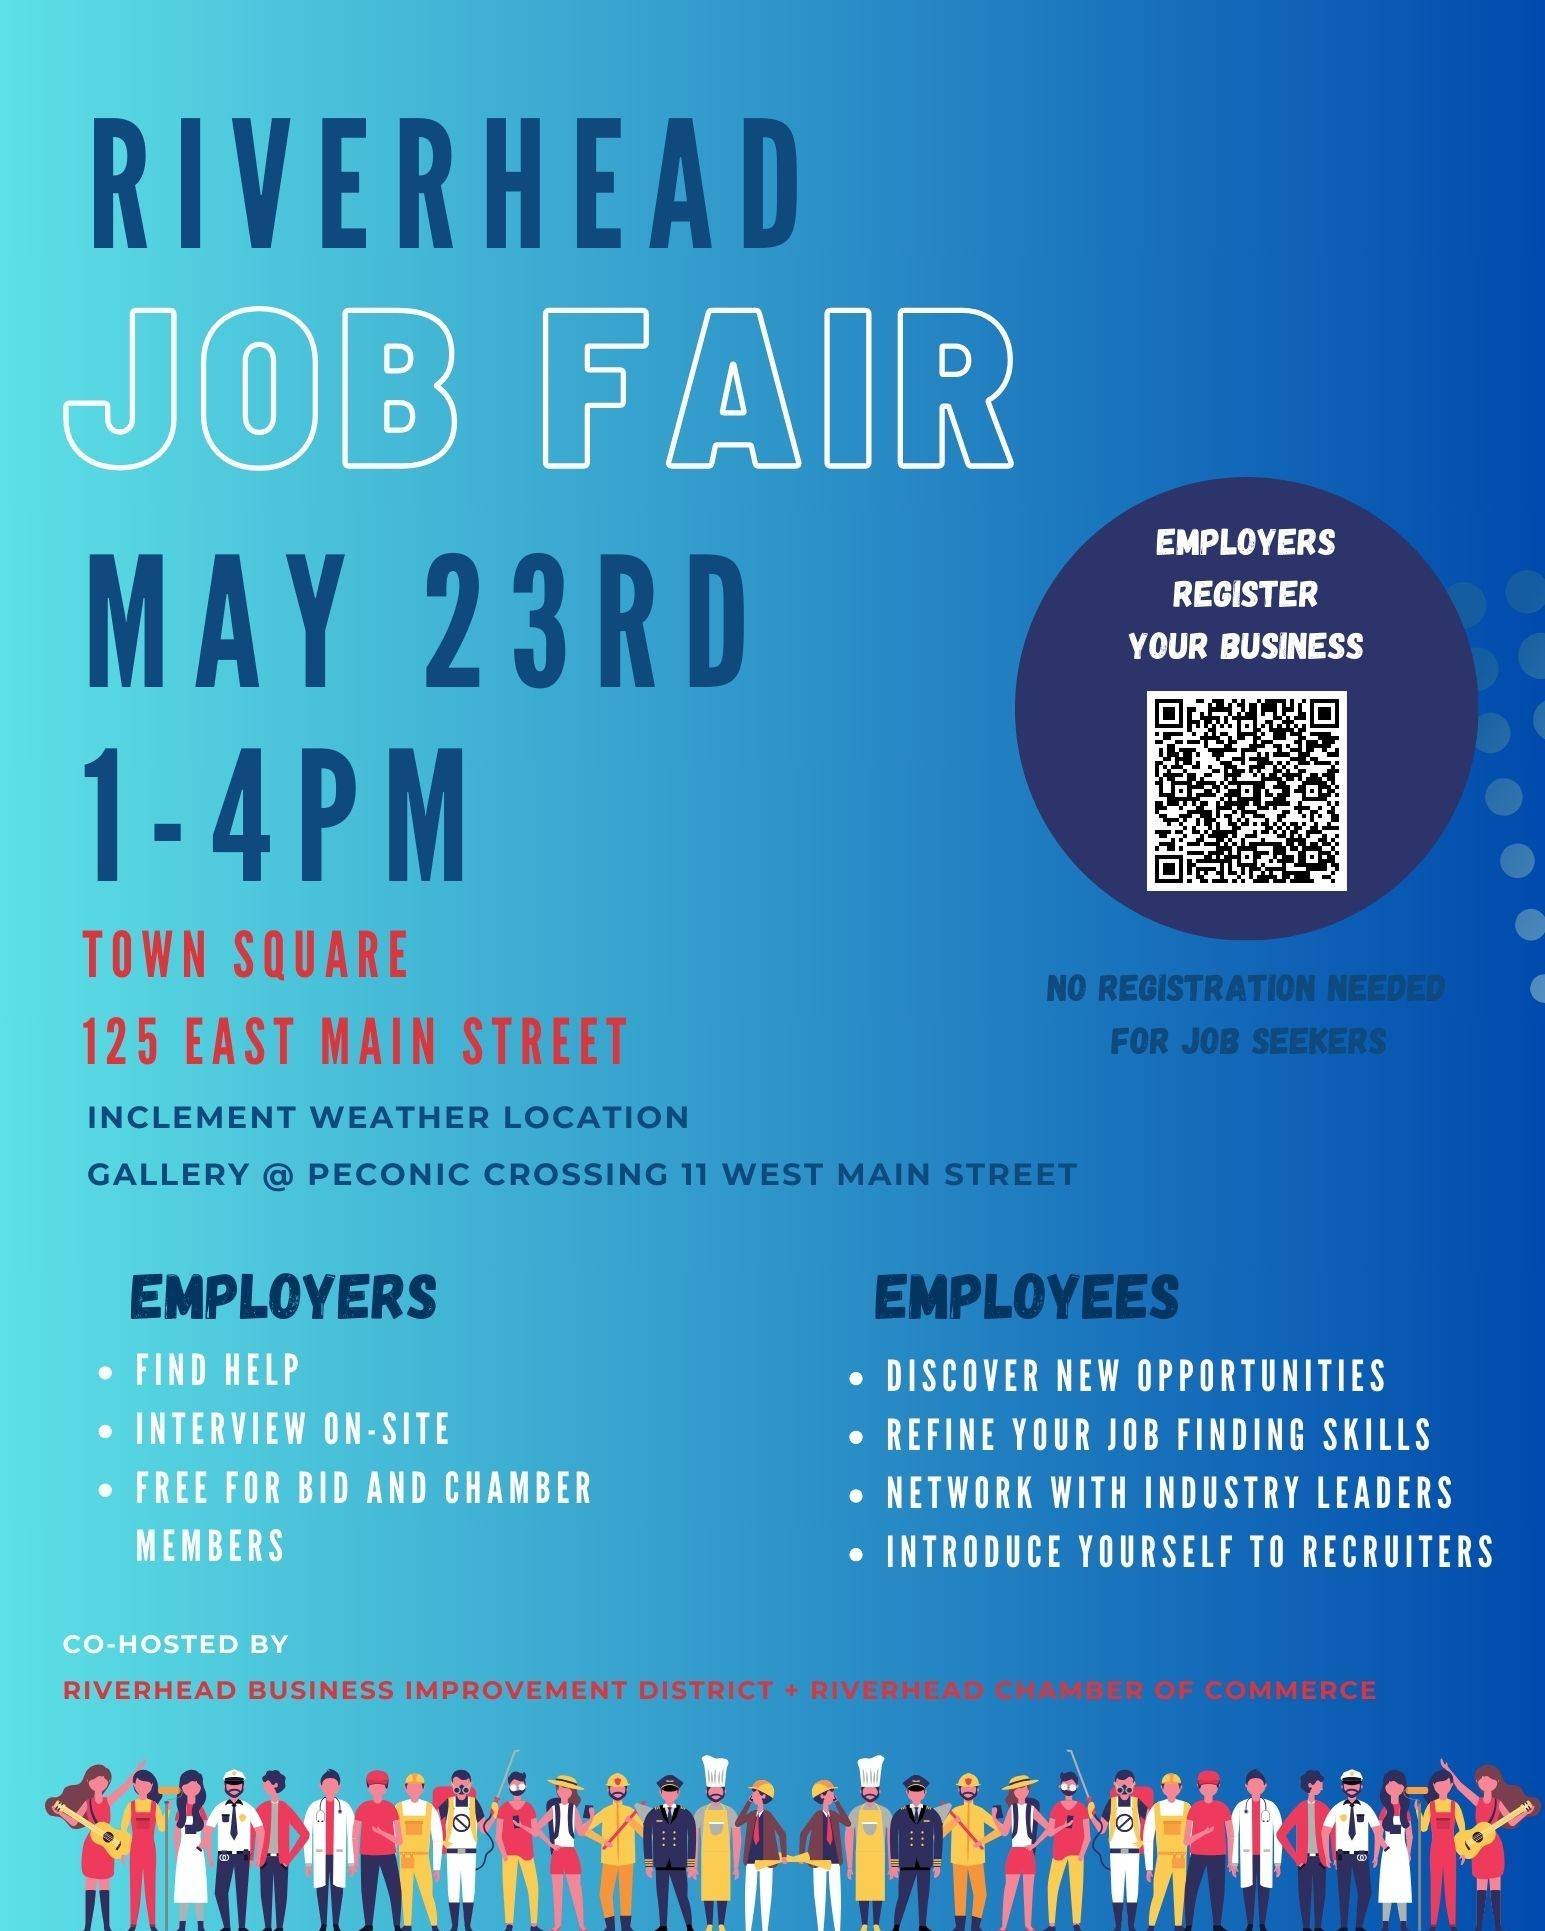 Riverhead Job Fair 
Thursday, May 23rd from 1-4pm
Located in Town Square 125 East Main Street
(rain location: gallery at Peconic Crossing 11 West Main Street)

Job Seekers
- Discover new opportunities
- Refine your job-finding skills
- Network with i